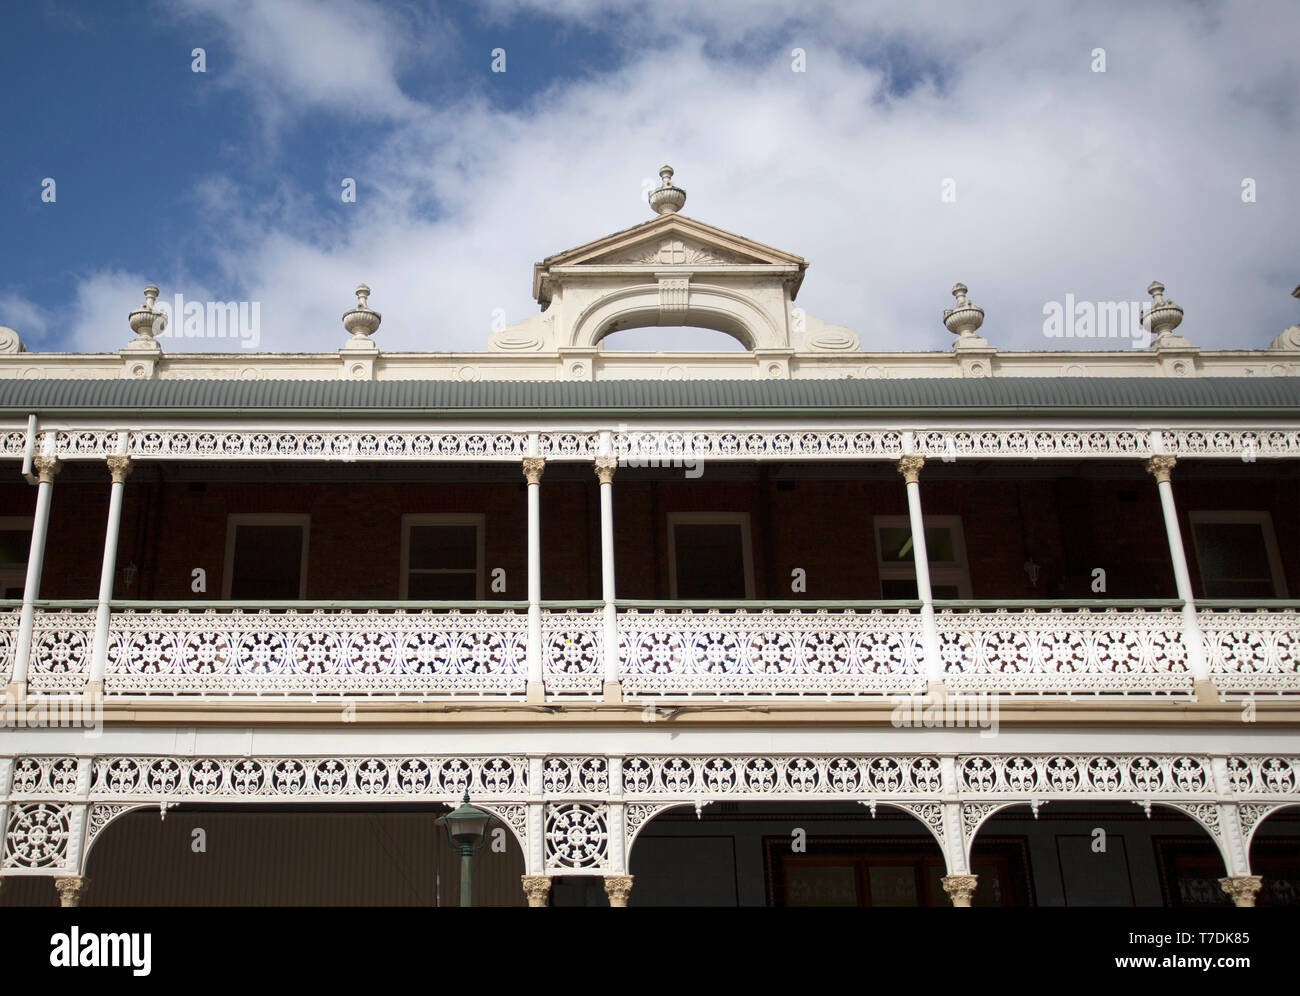 Detail of the heritage listed Hotel built in 1889 and ornamented with cast-iron friezework, bullnose awnings and parapets with Grecian urns and pedime Stock Photo